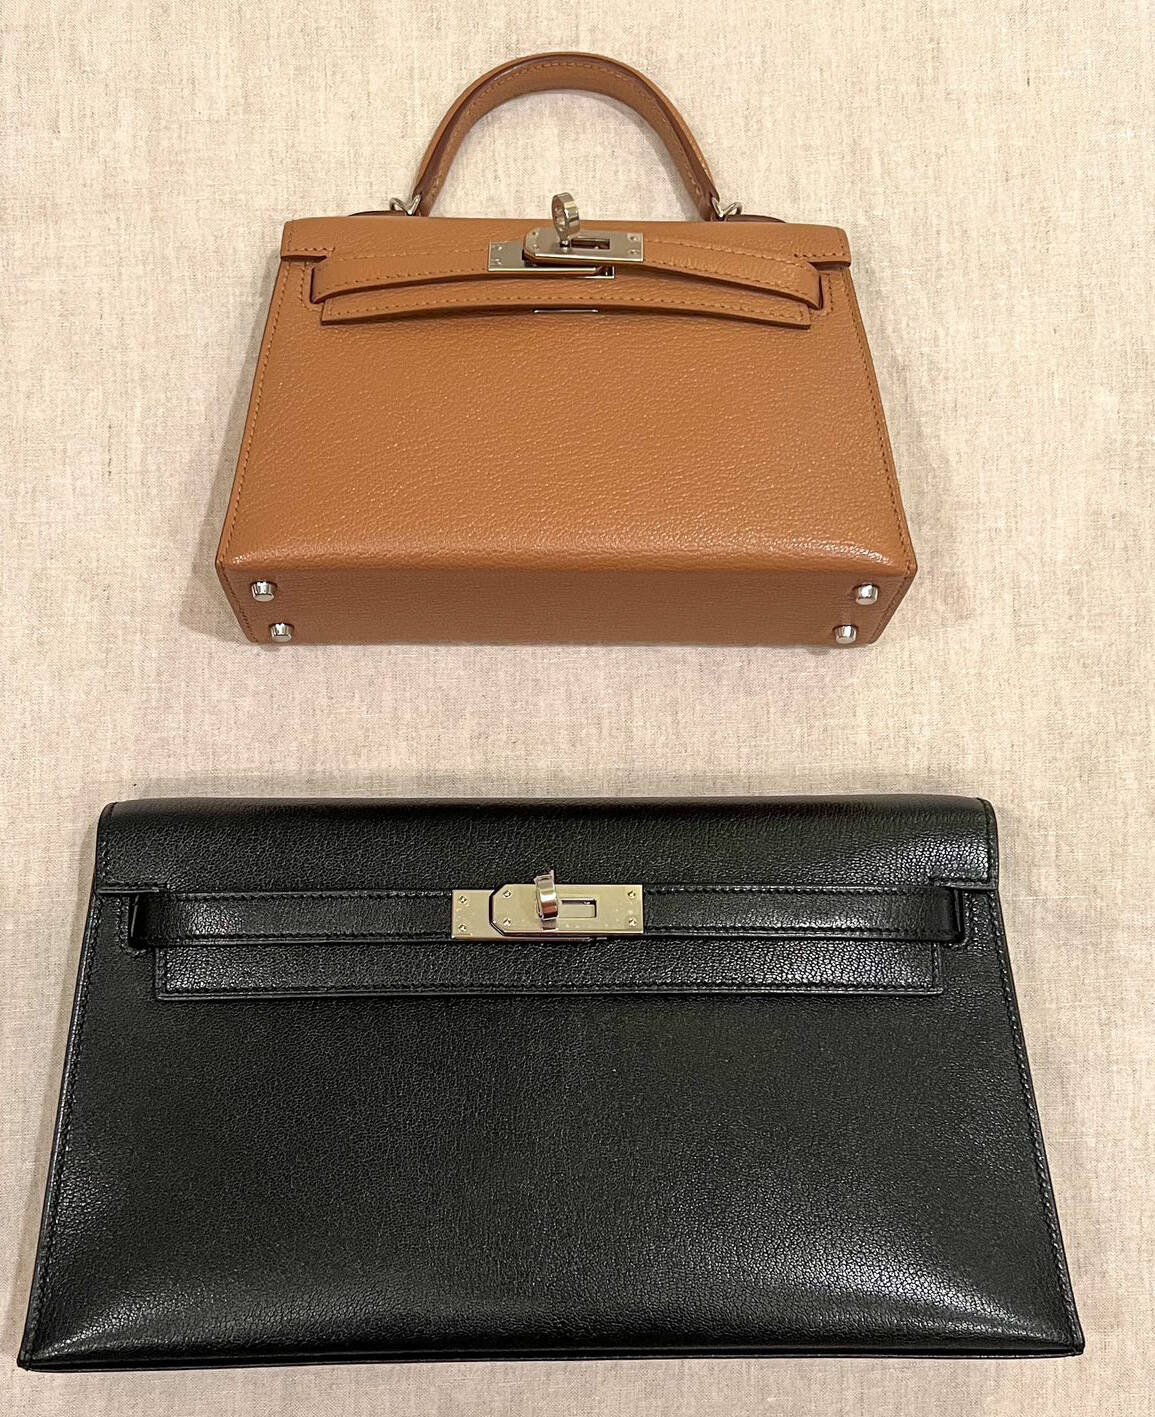 Official Battle of the Clutches: Kelly Cut vs. Kelly Pochette - PurseBop